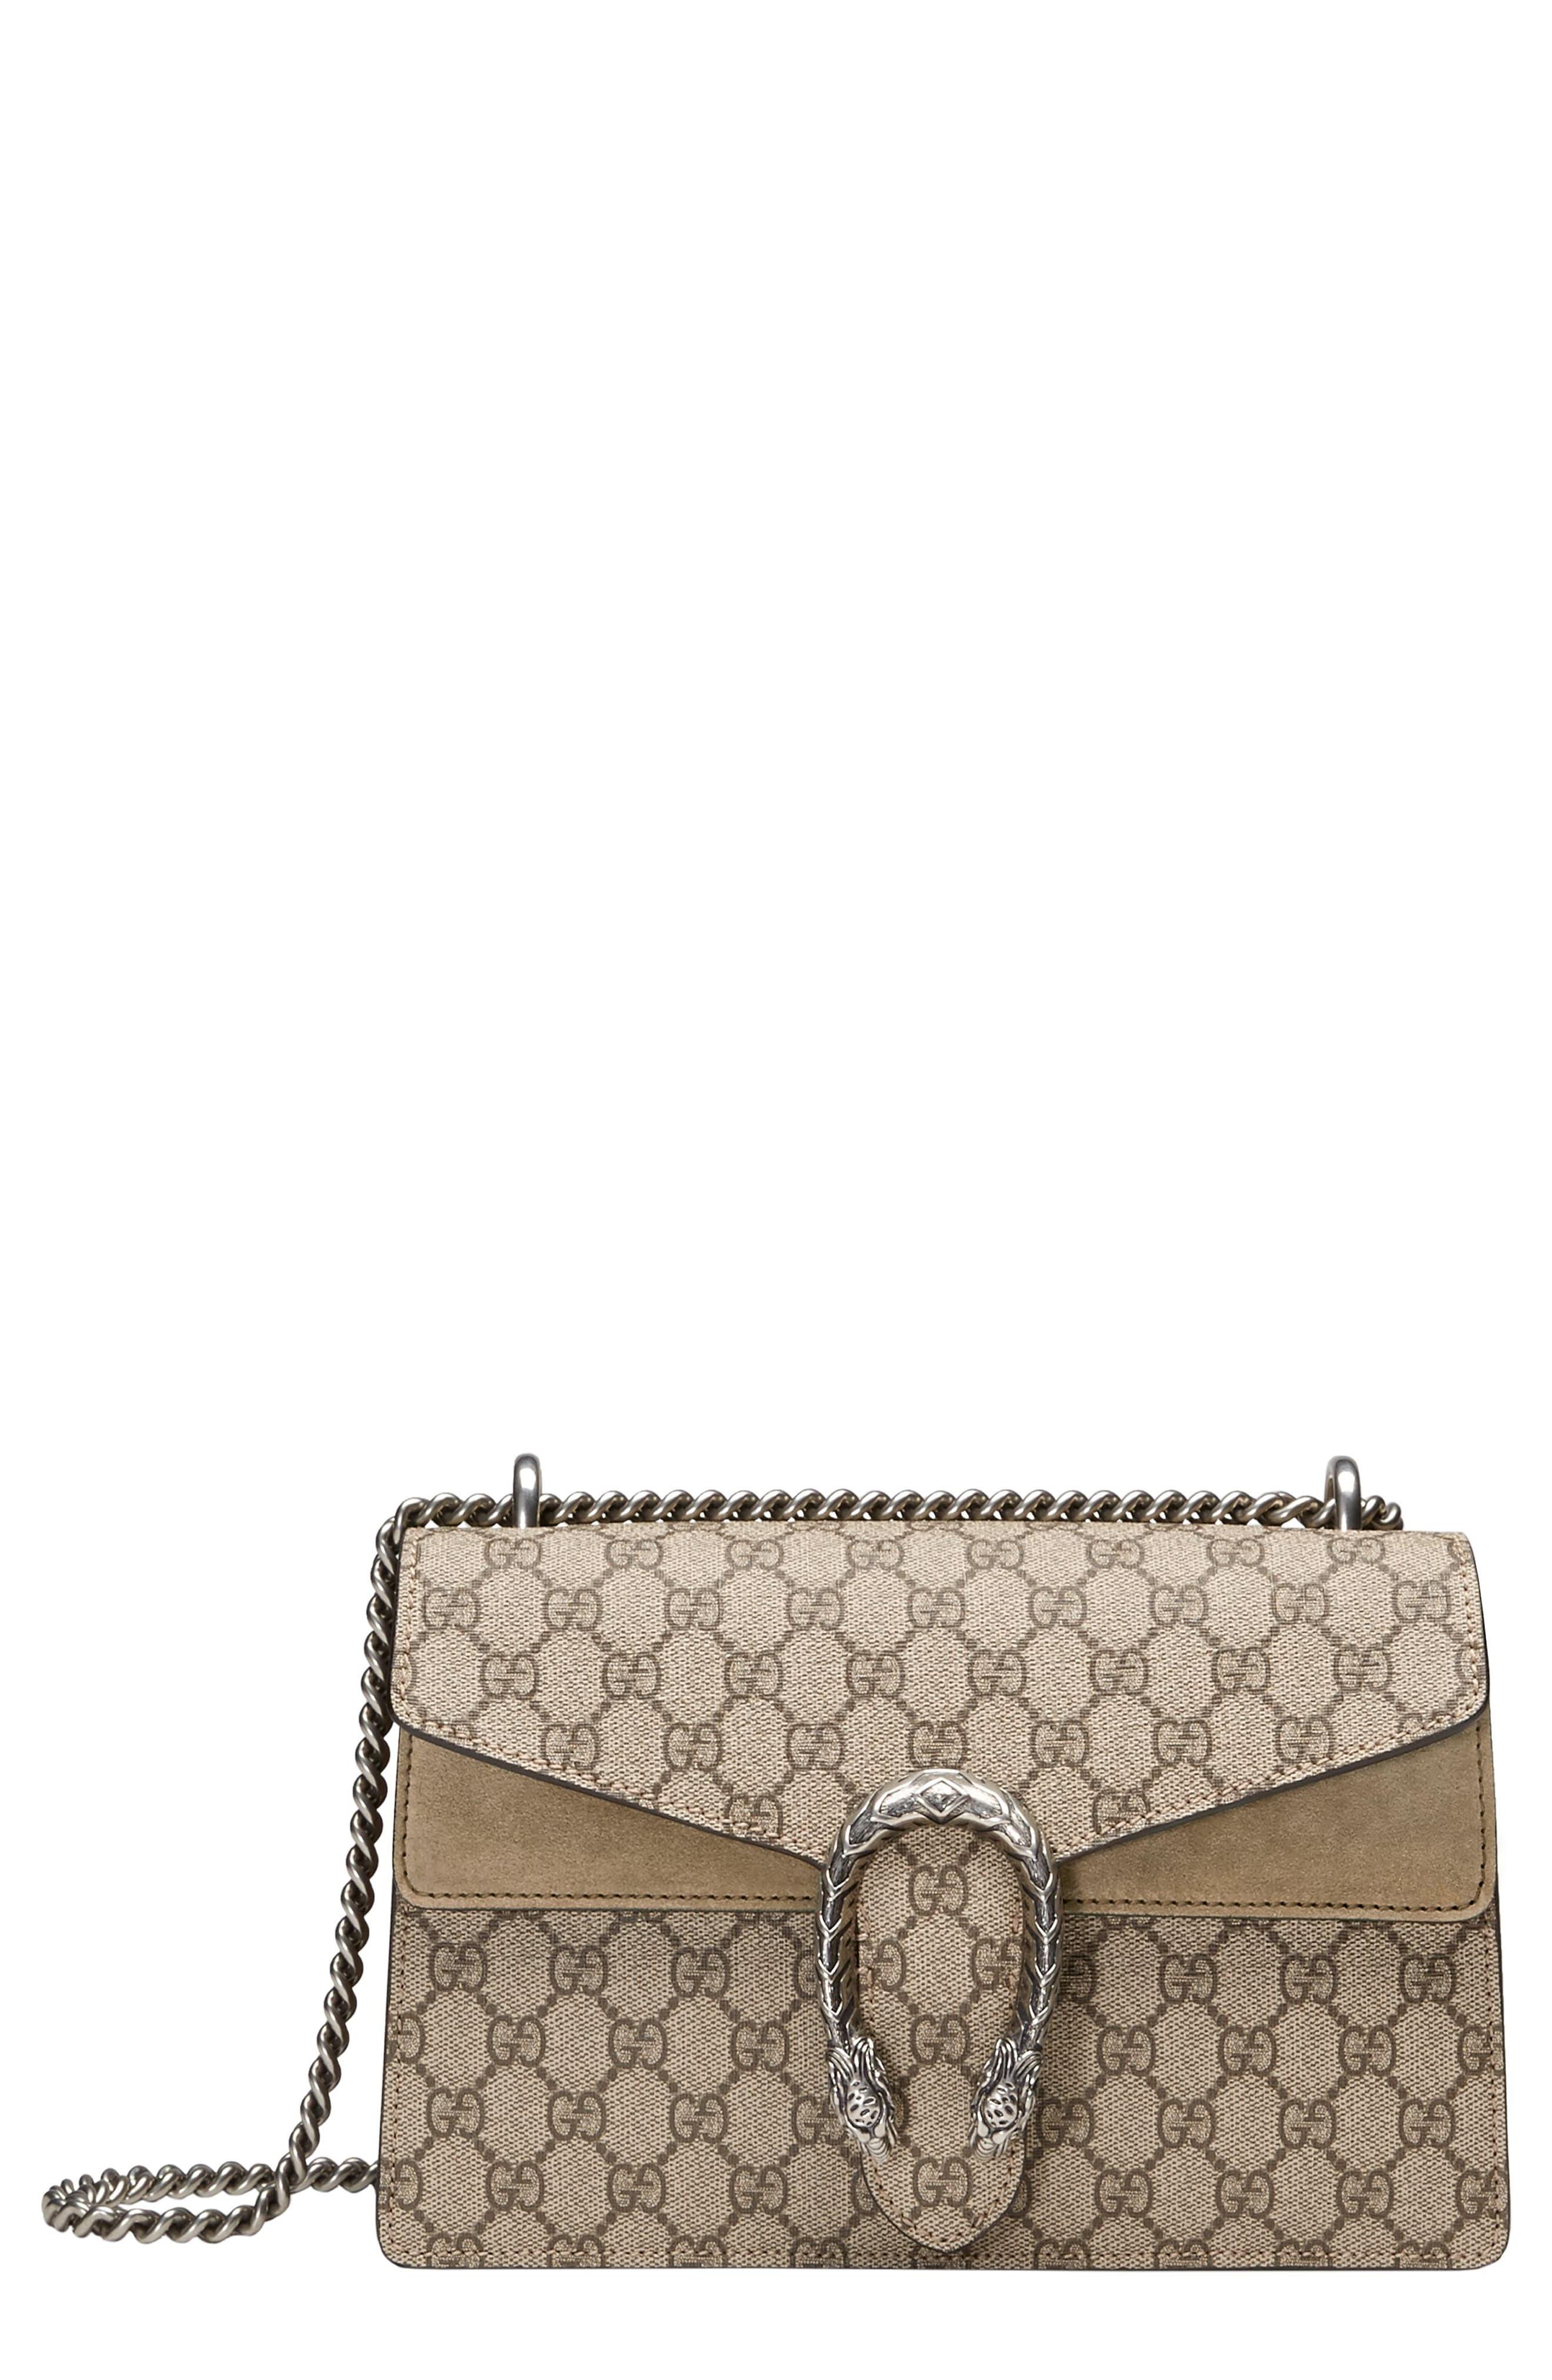 Gucci Small Dionysus Gg Supreme Canvas & Suede Shoulder Bag - None in Beige (Natural) - Lyst